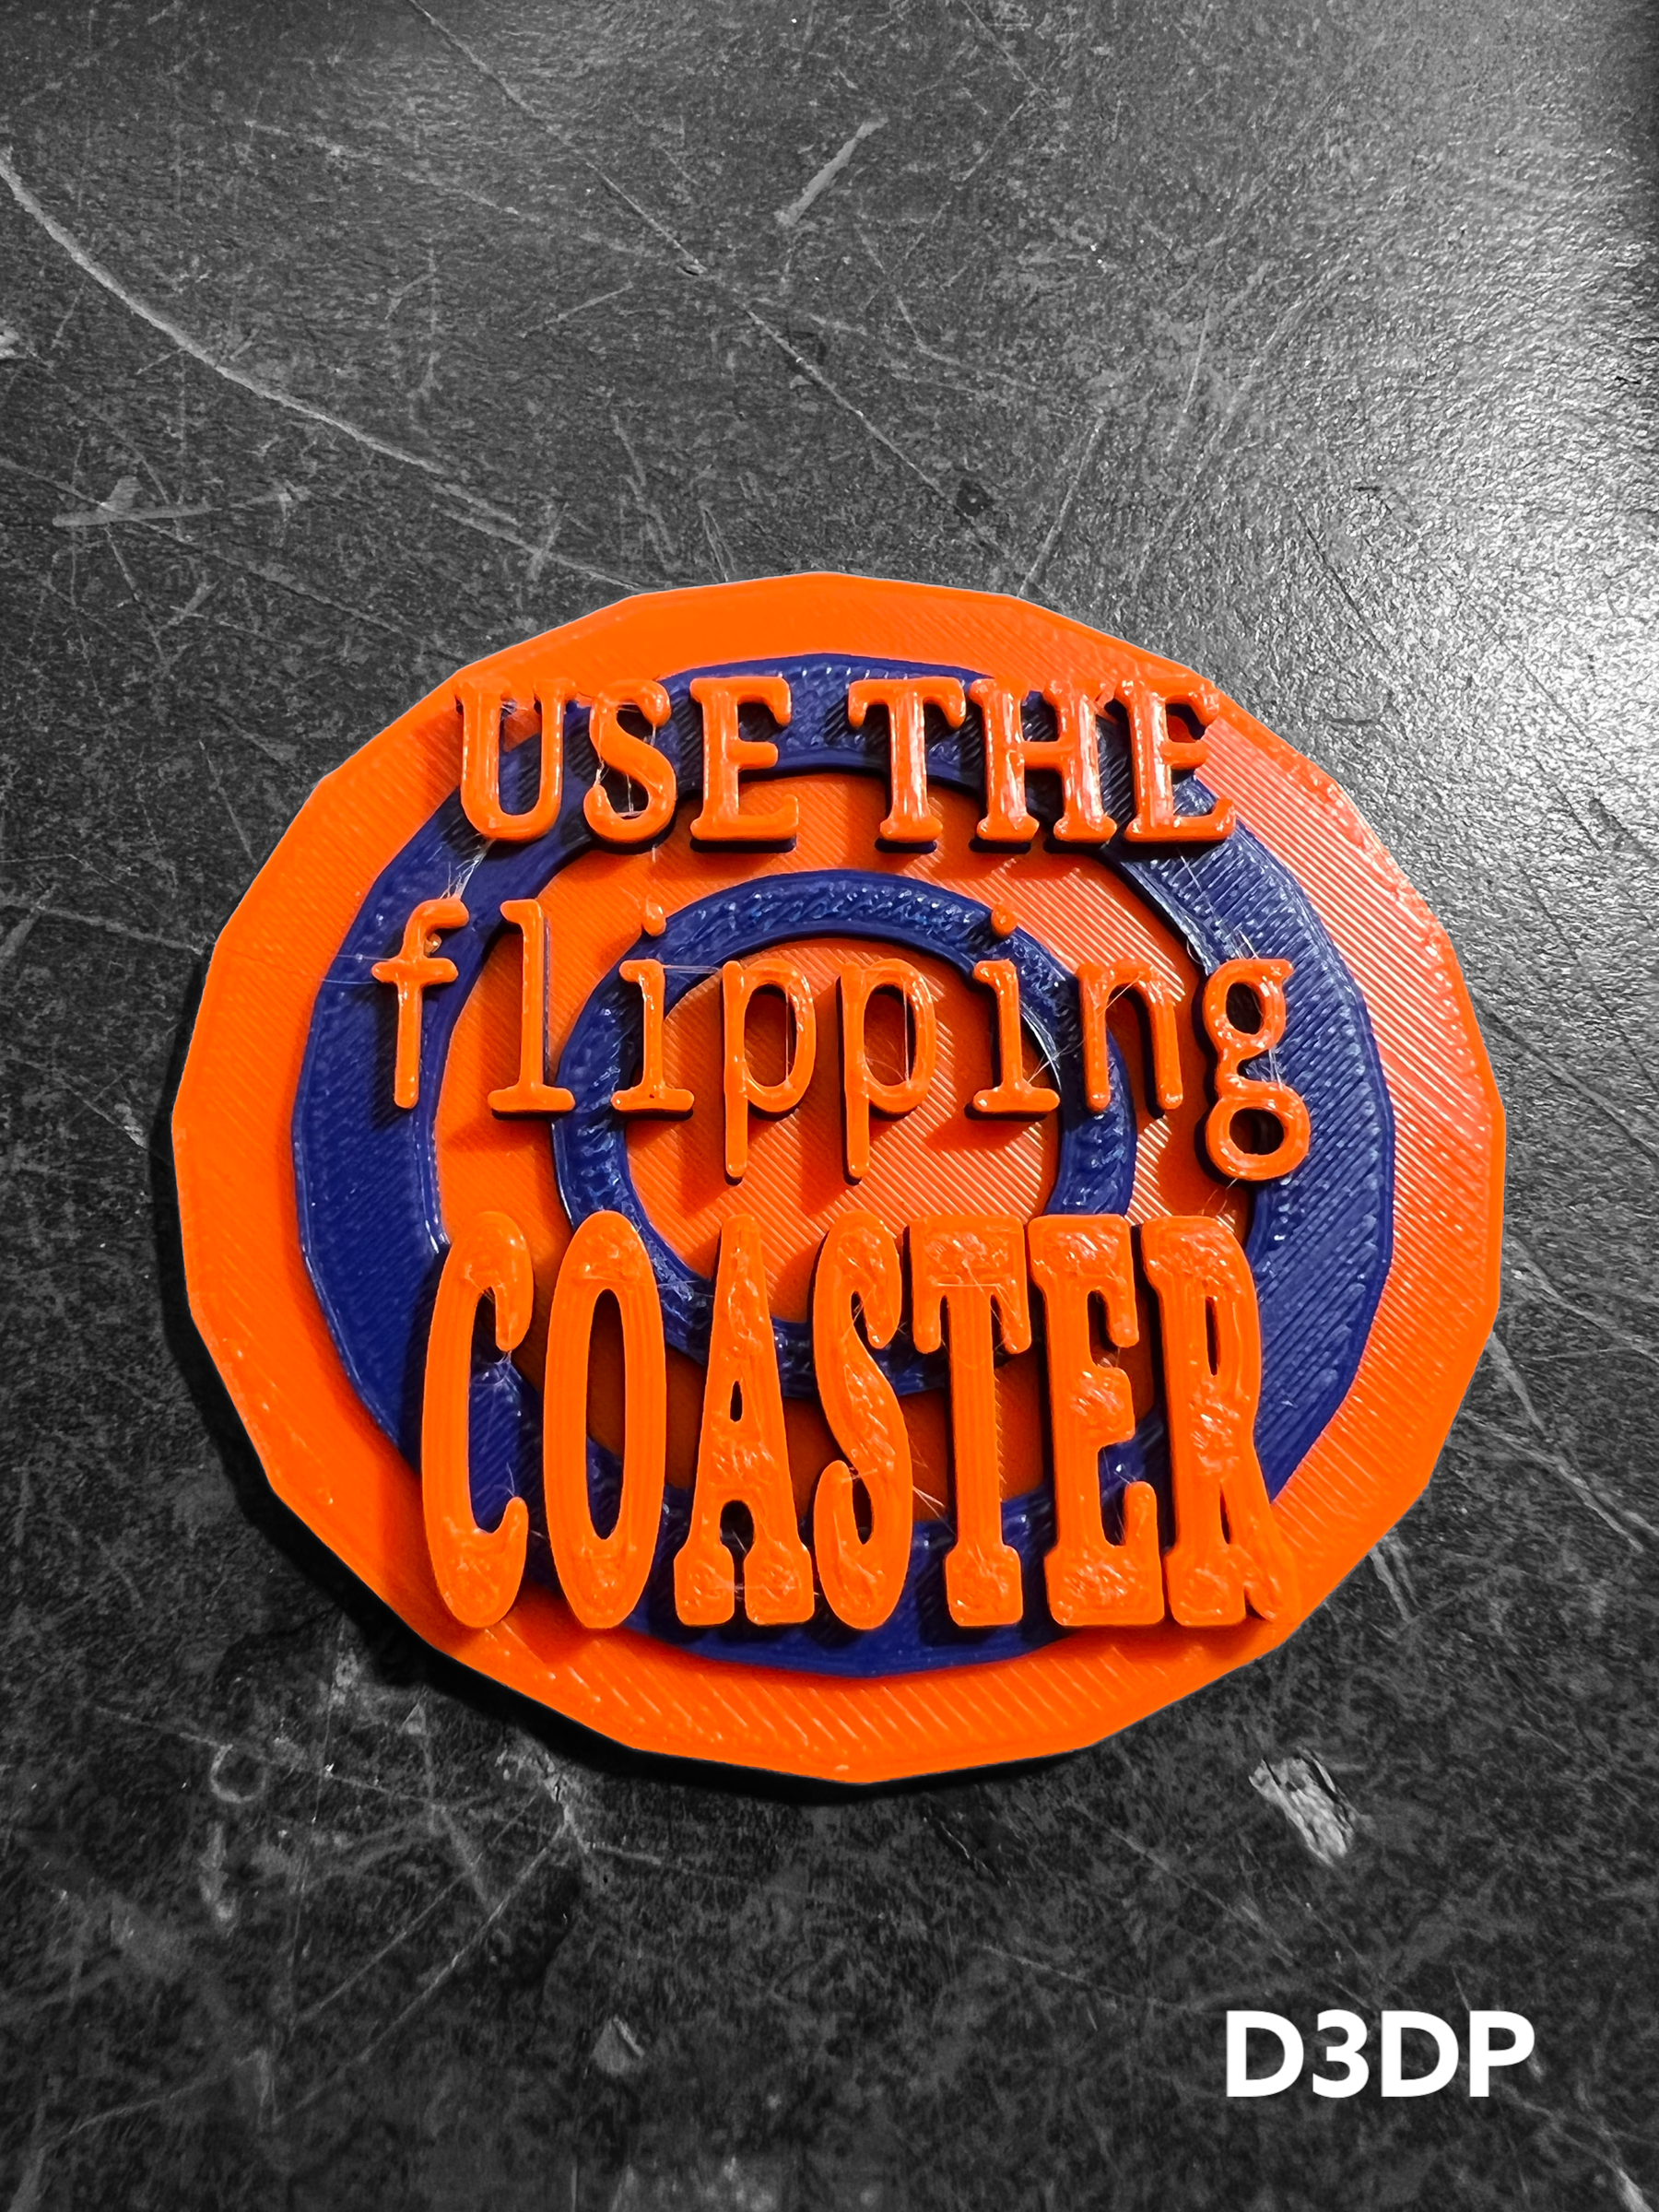 Flipping Coster